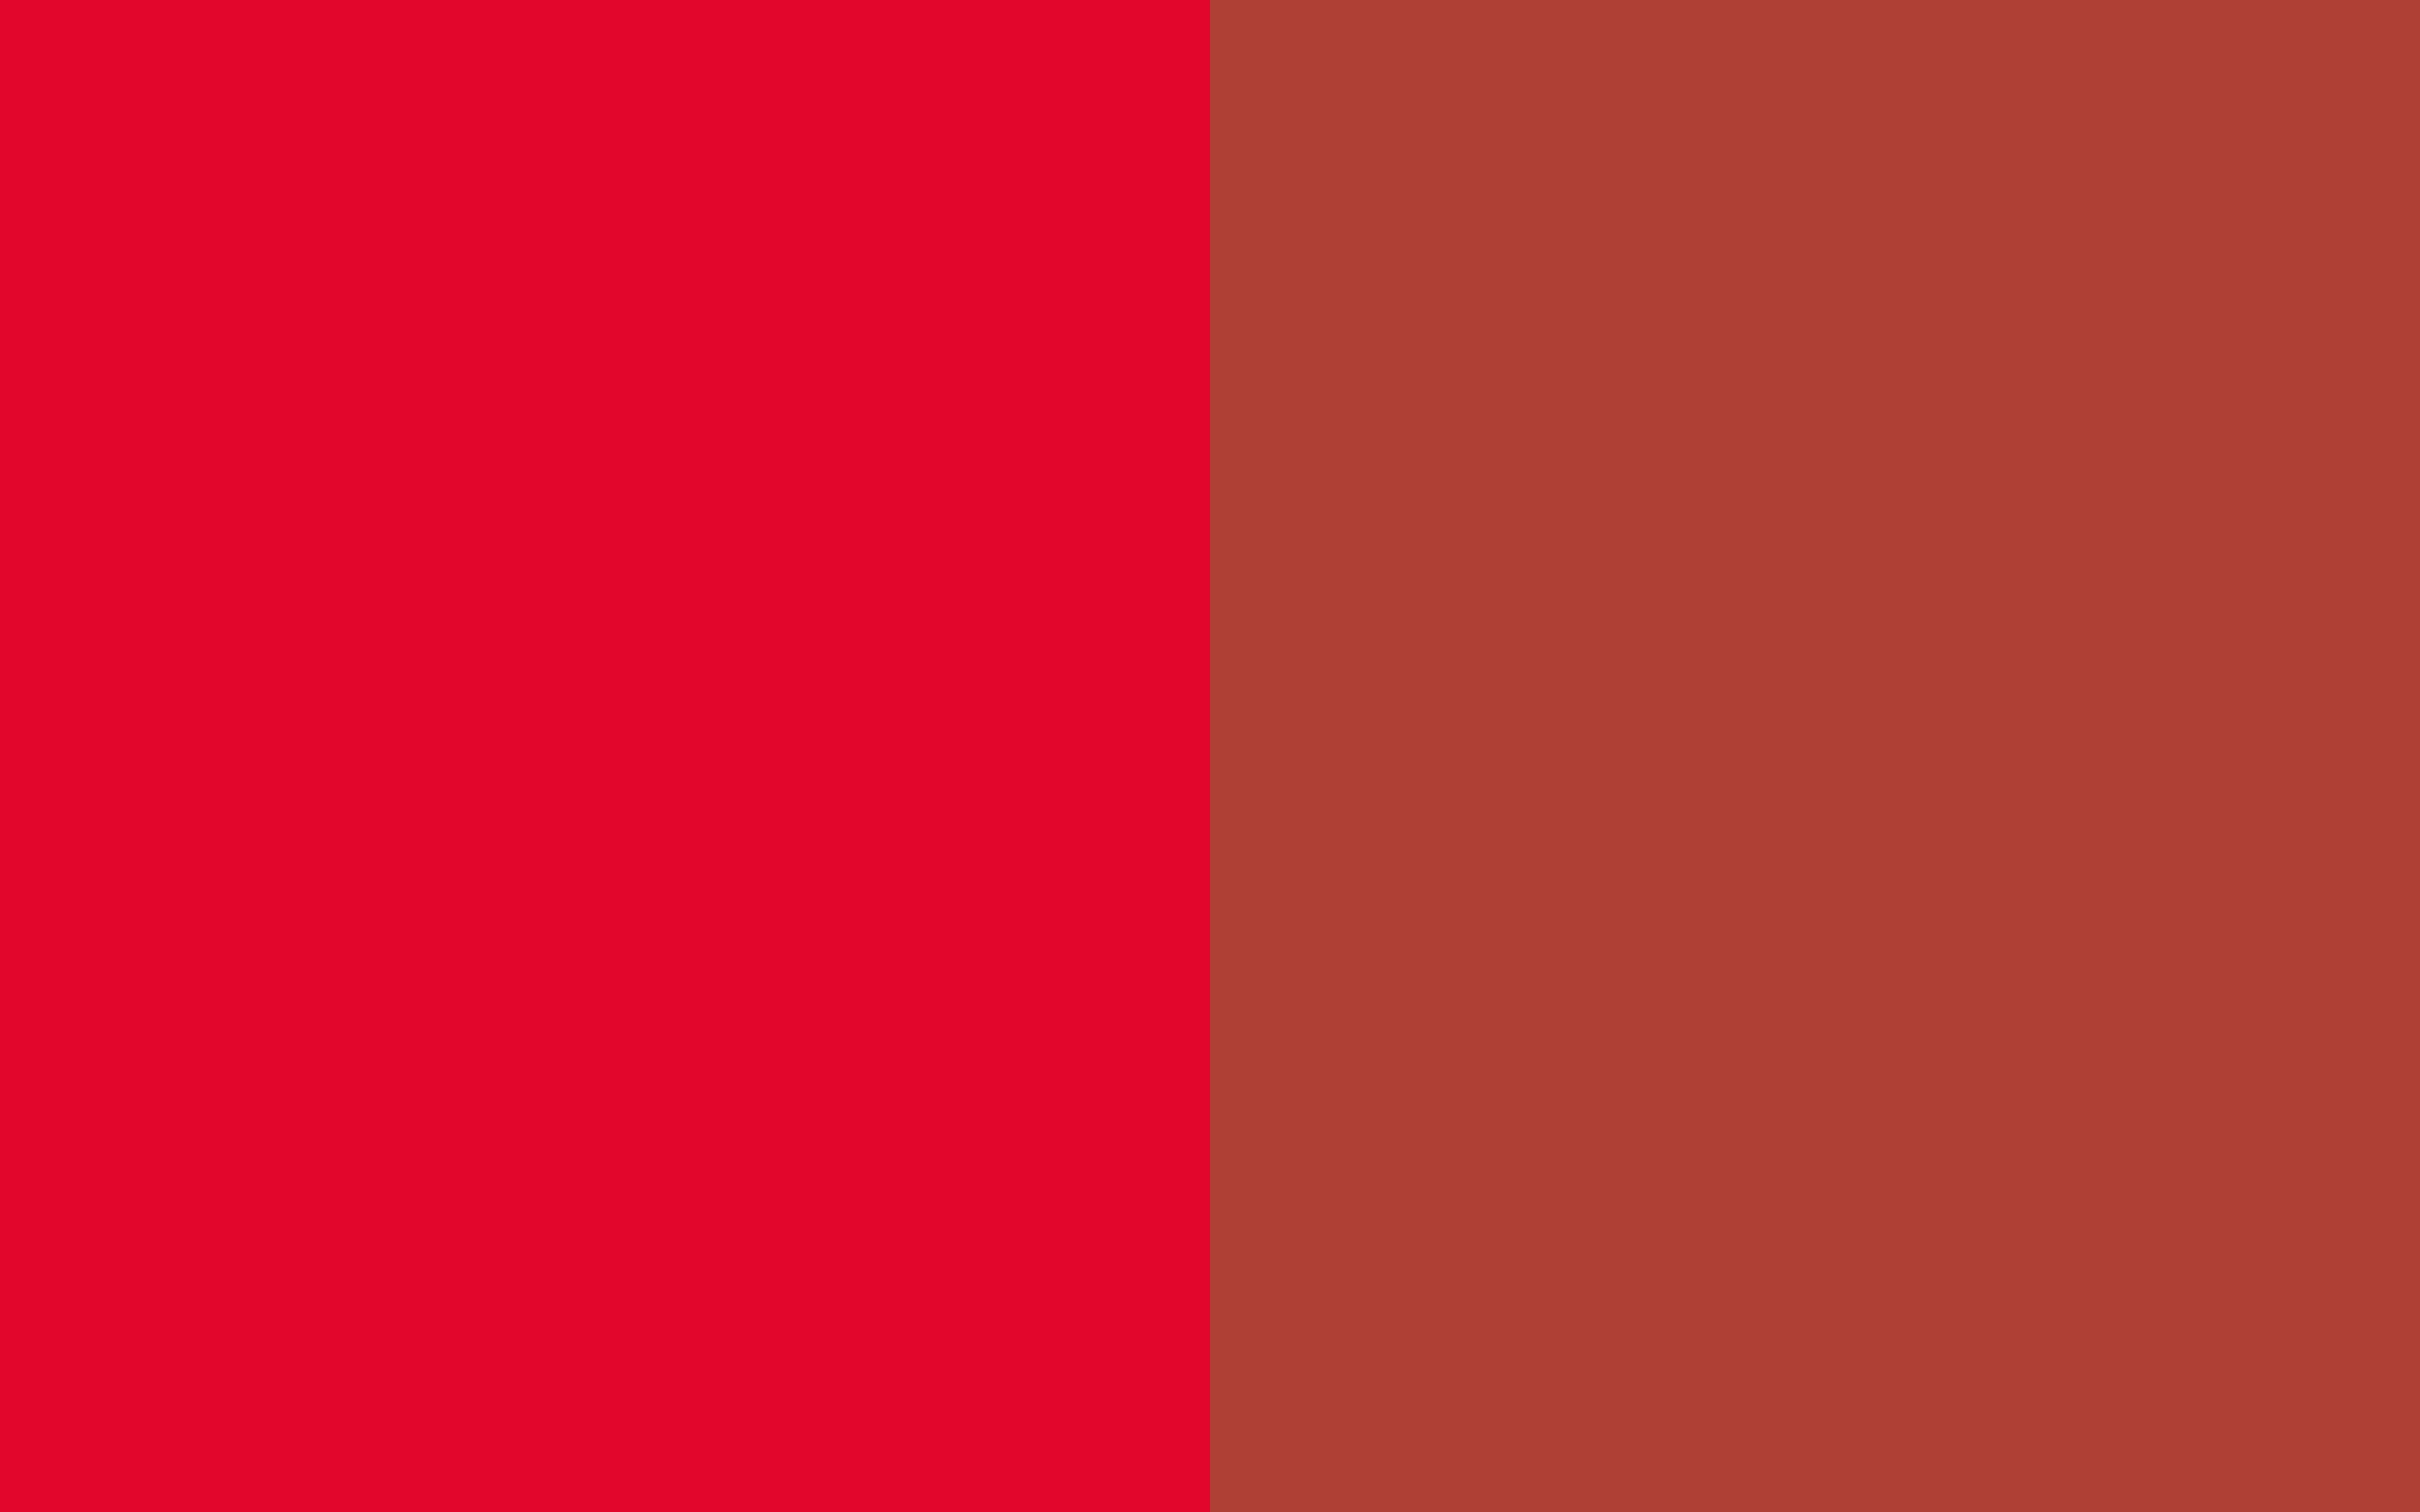 Medium Candy Apple Red And Carmine Solid Two Color Background